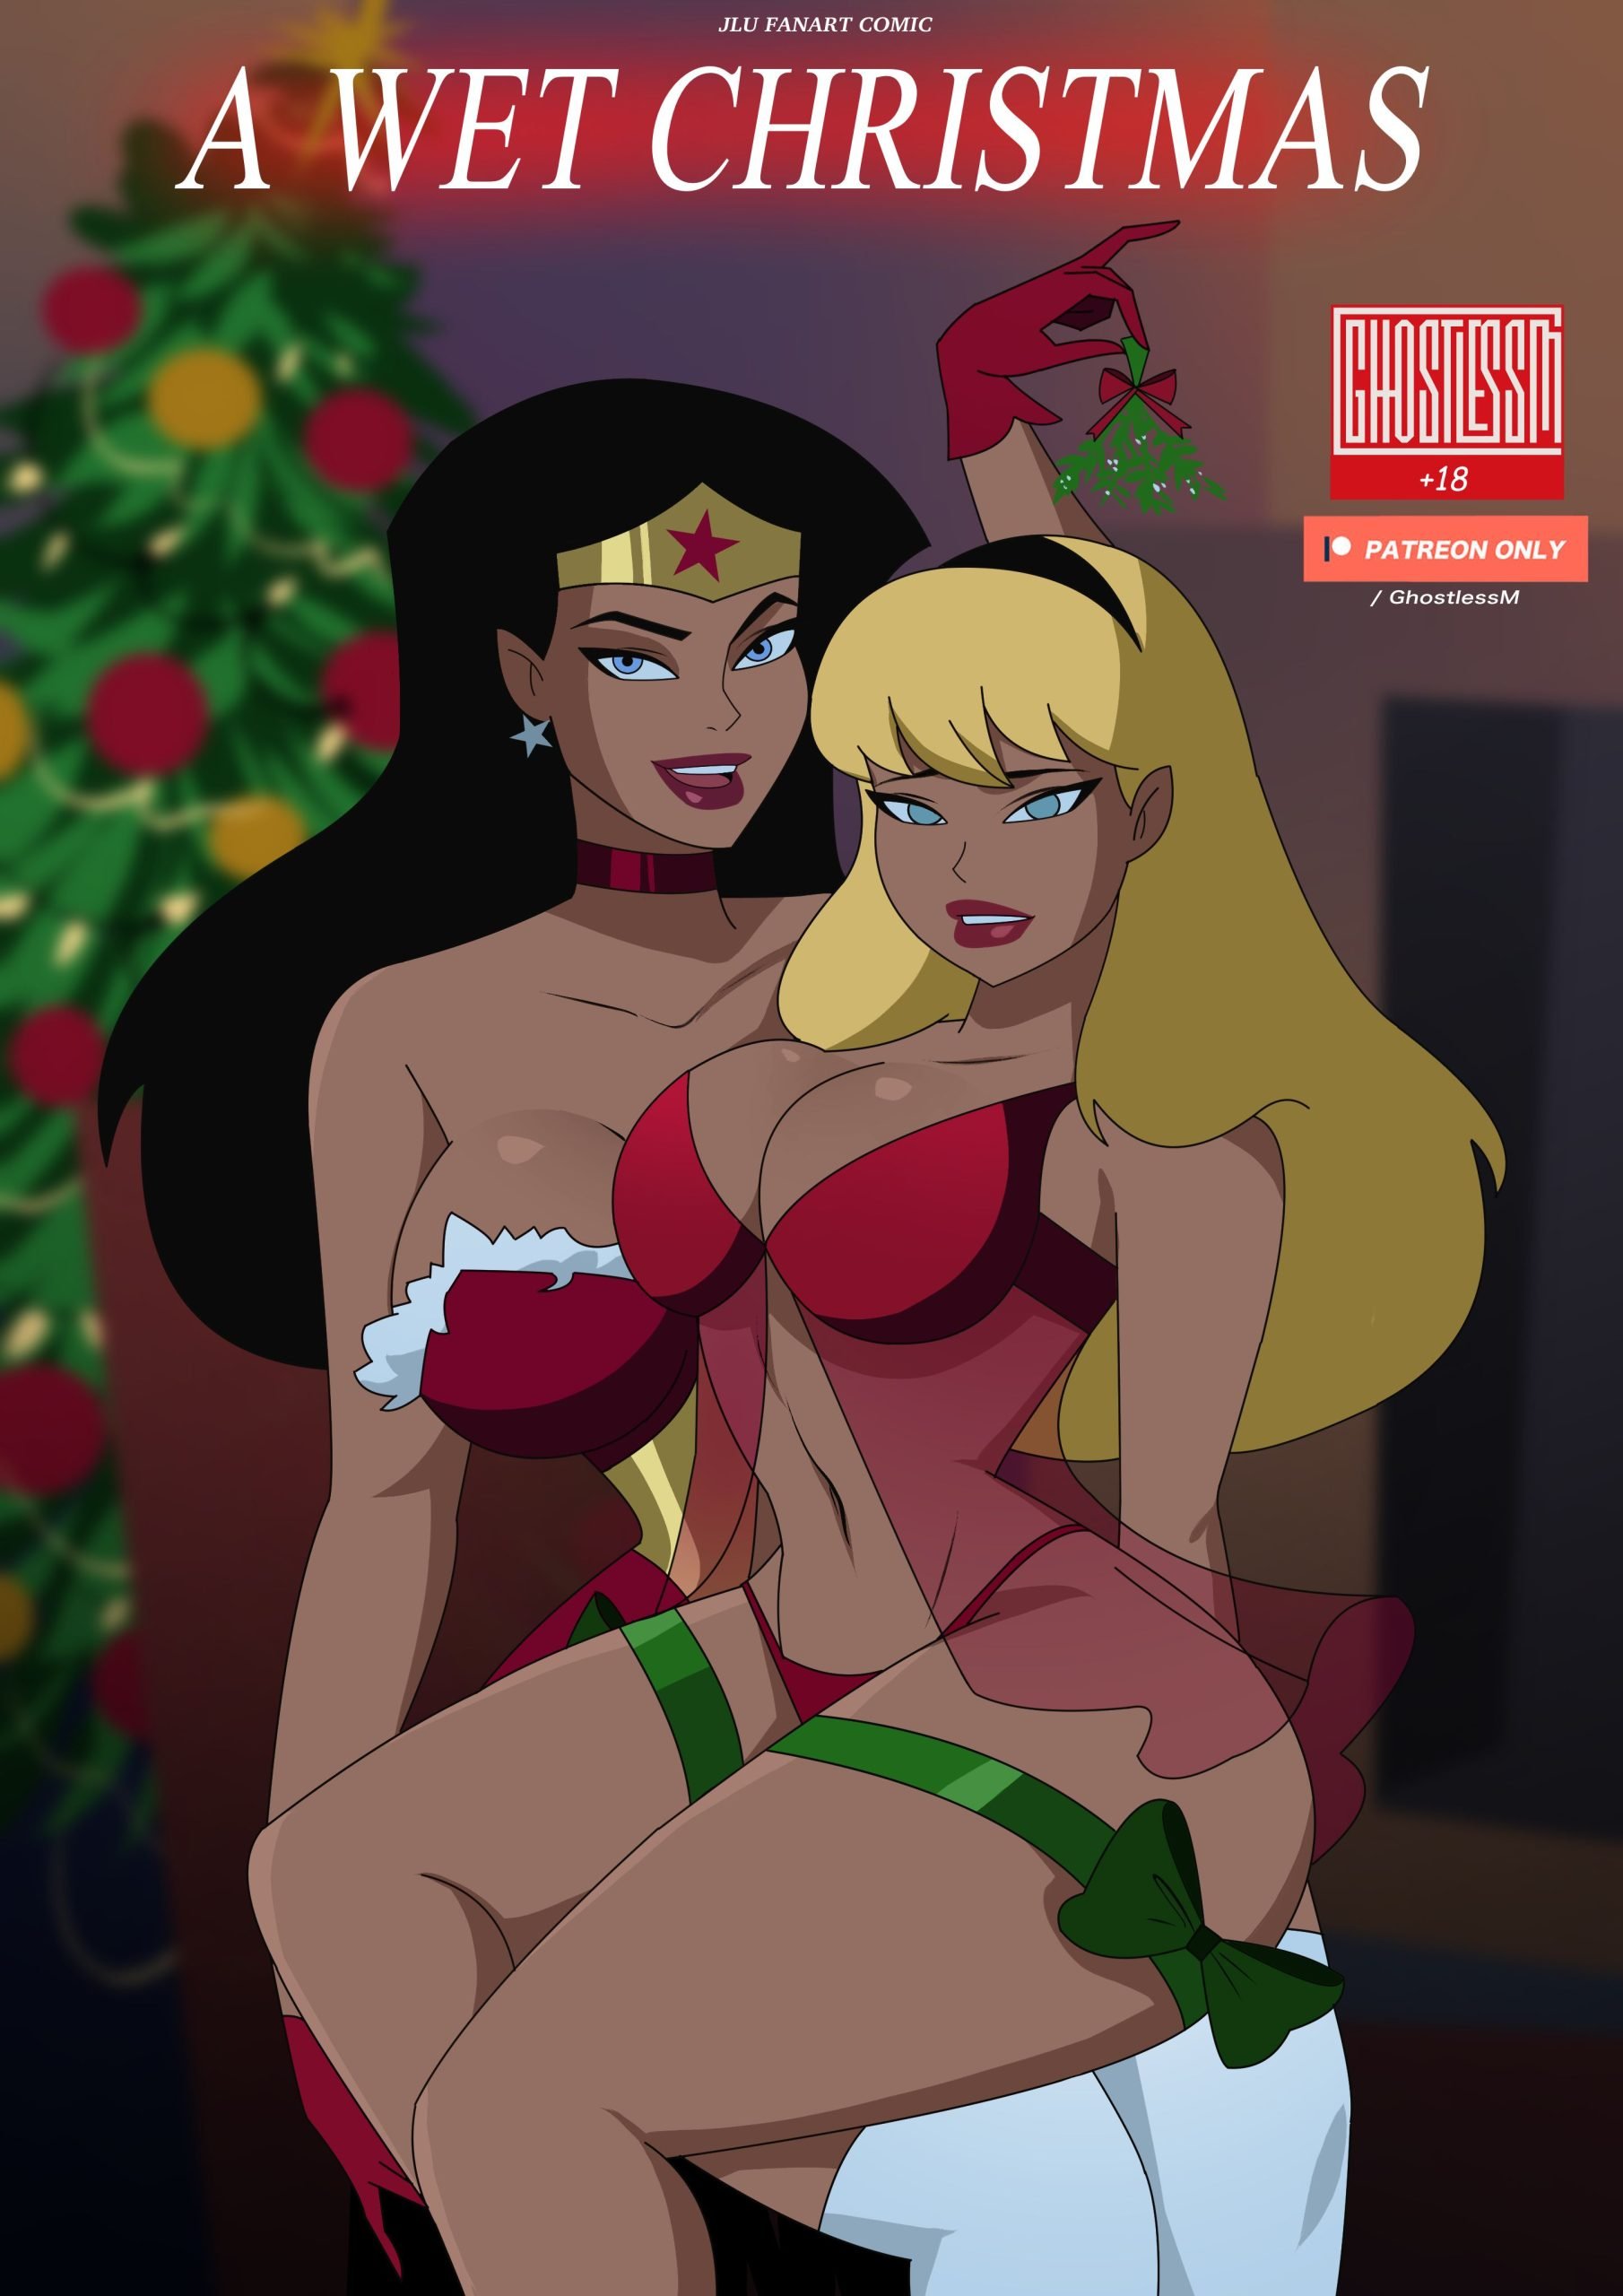 A Wet Christmas (Justice League) GhostlessM Porn Comic image image